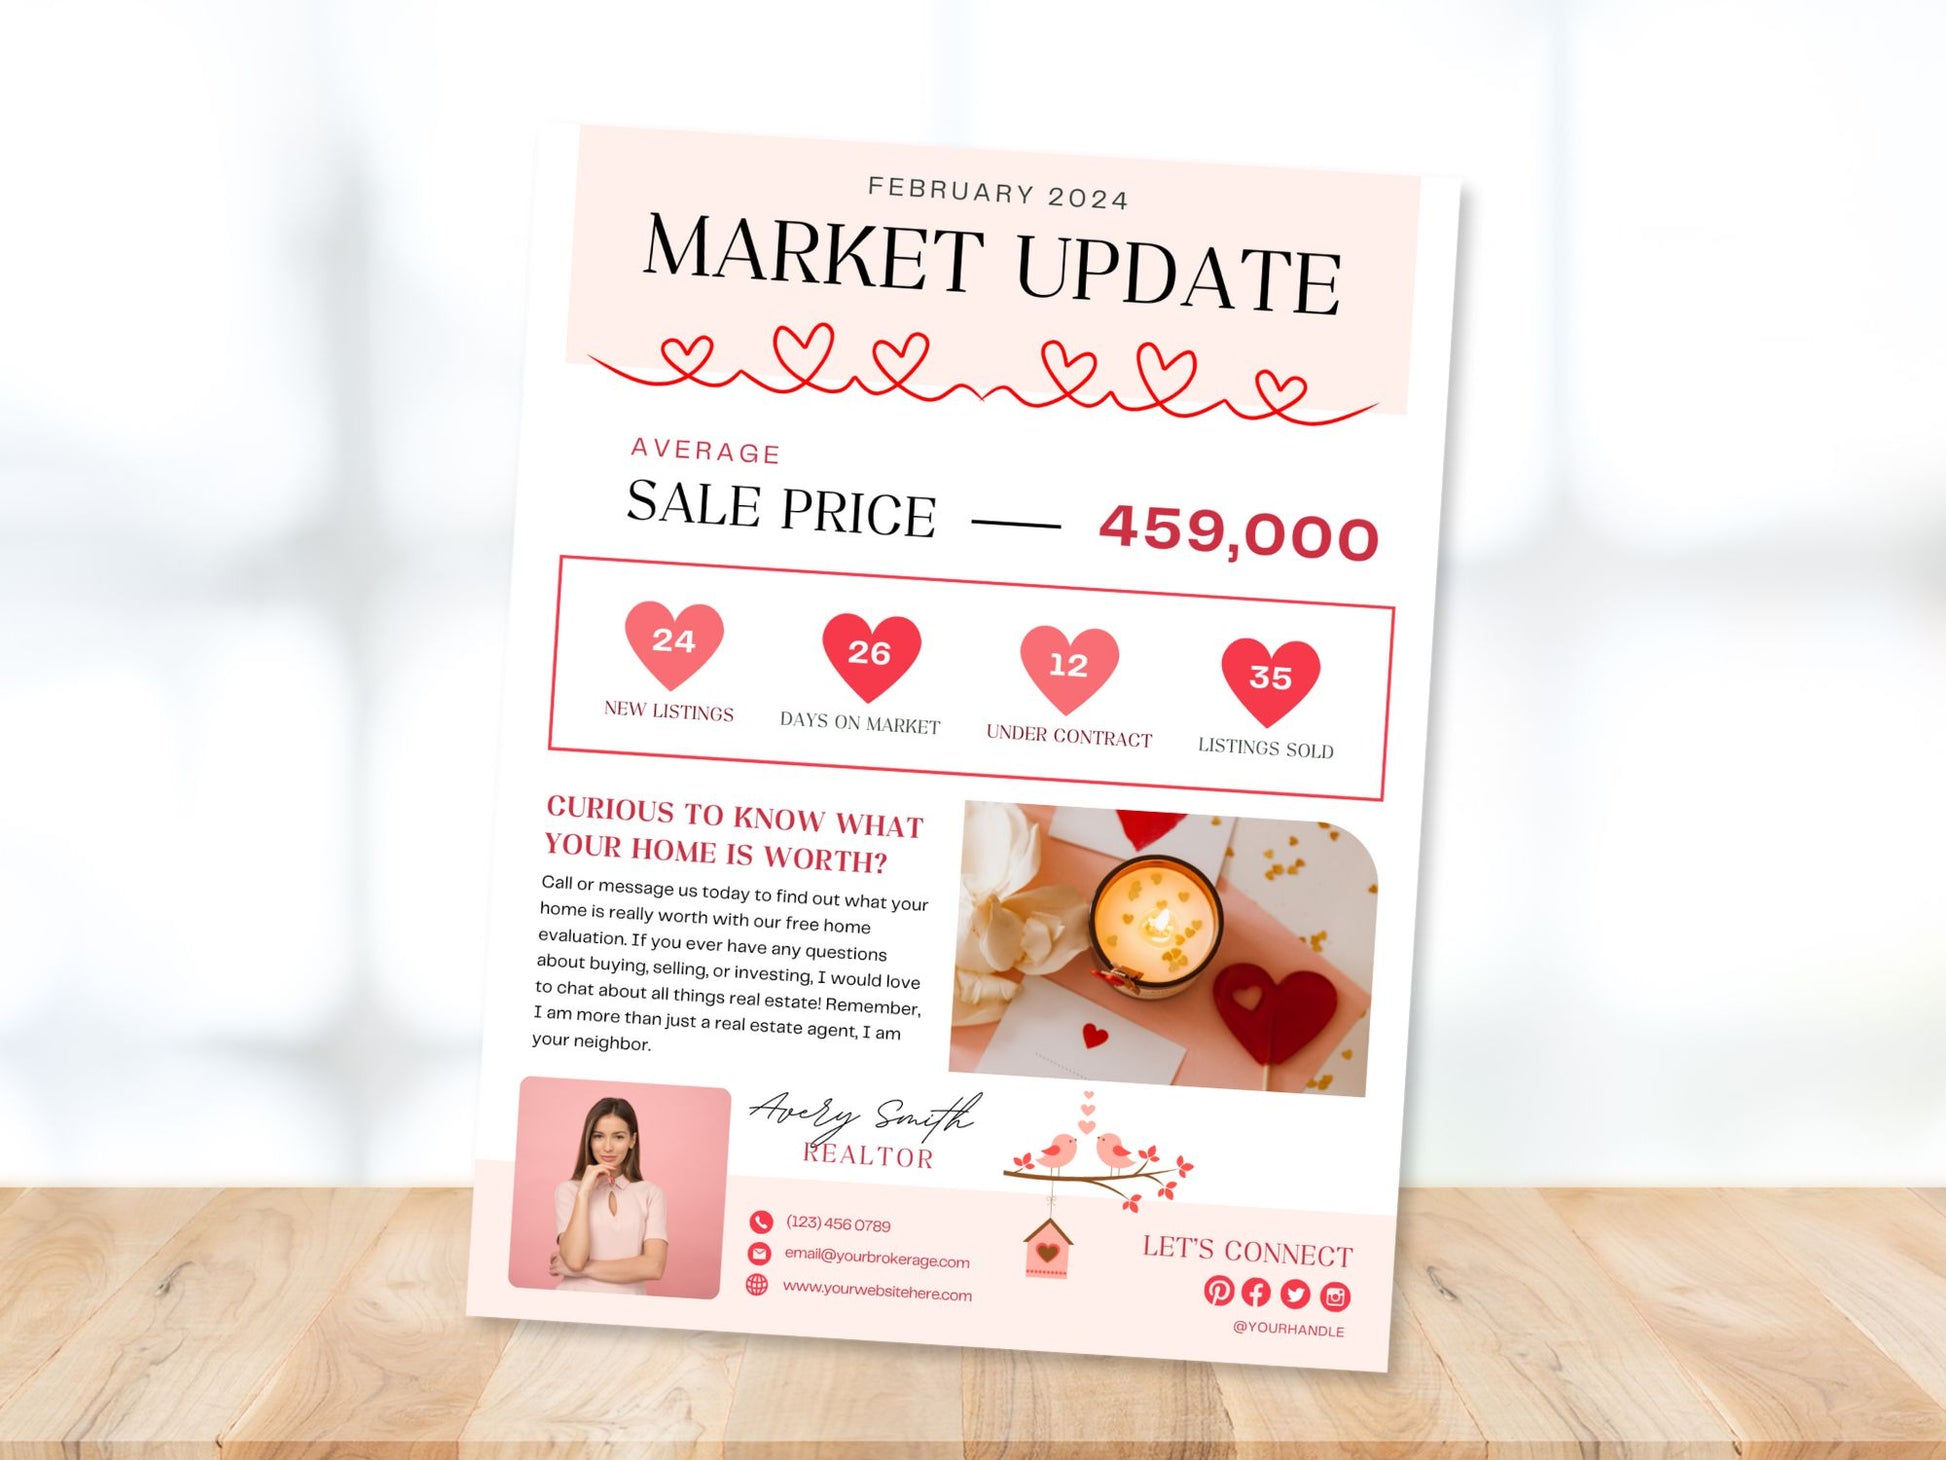 Valentine Market Update Flyer - Professionally designed real estate flyer with Valentine's charm for effective client communication.